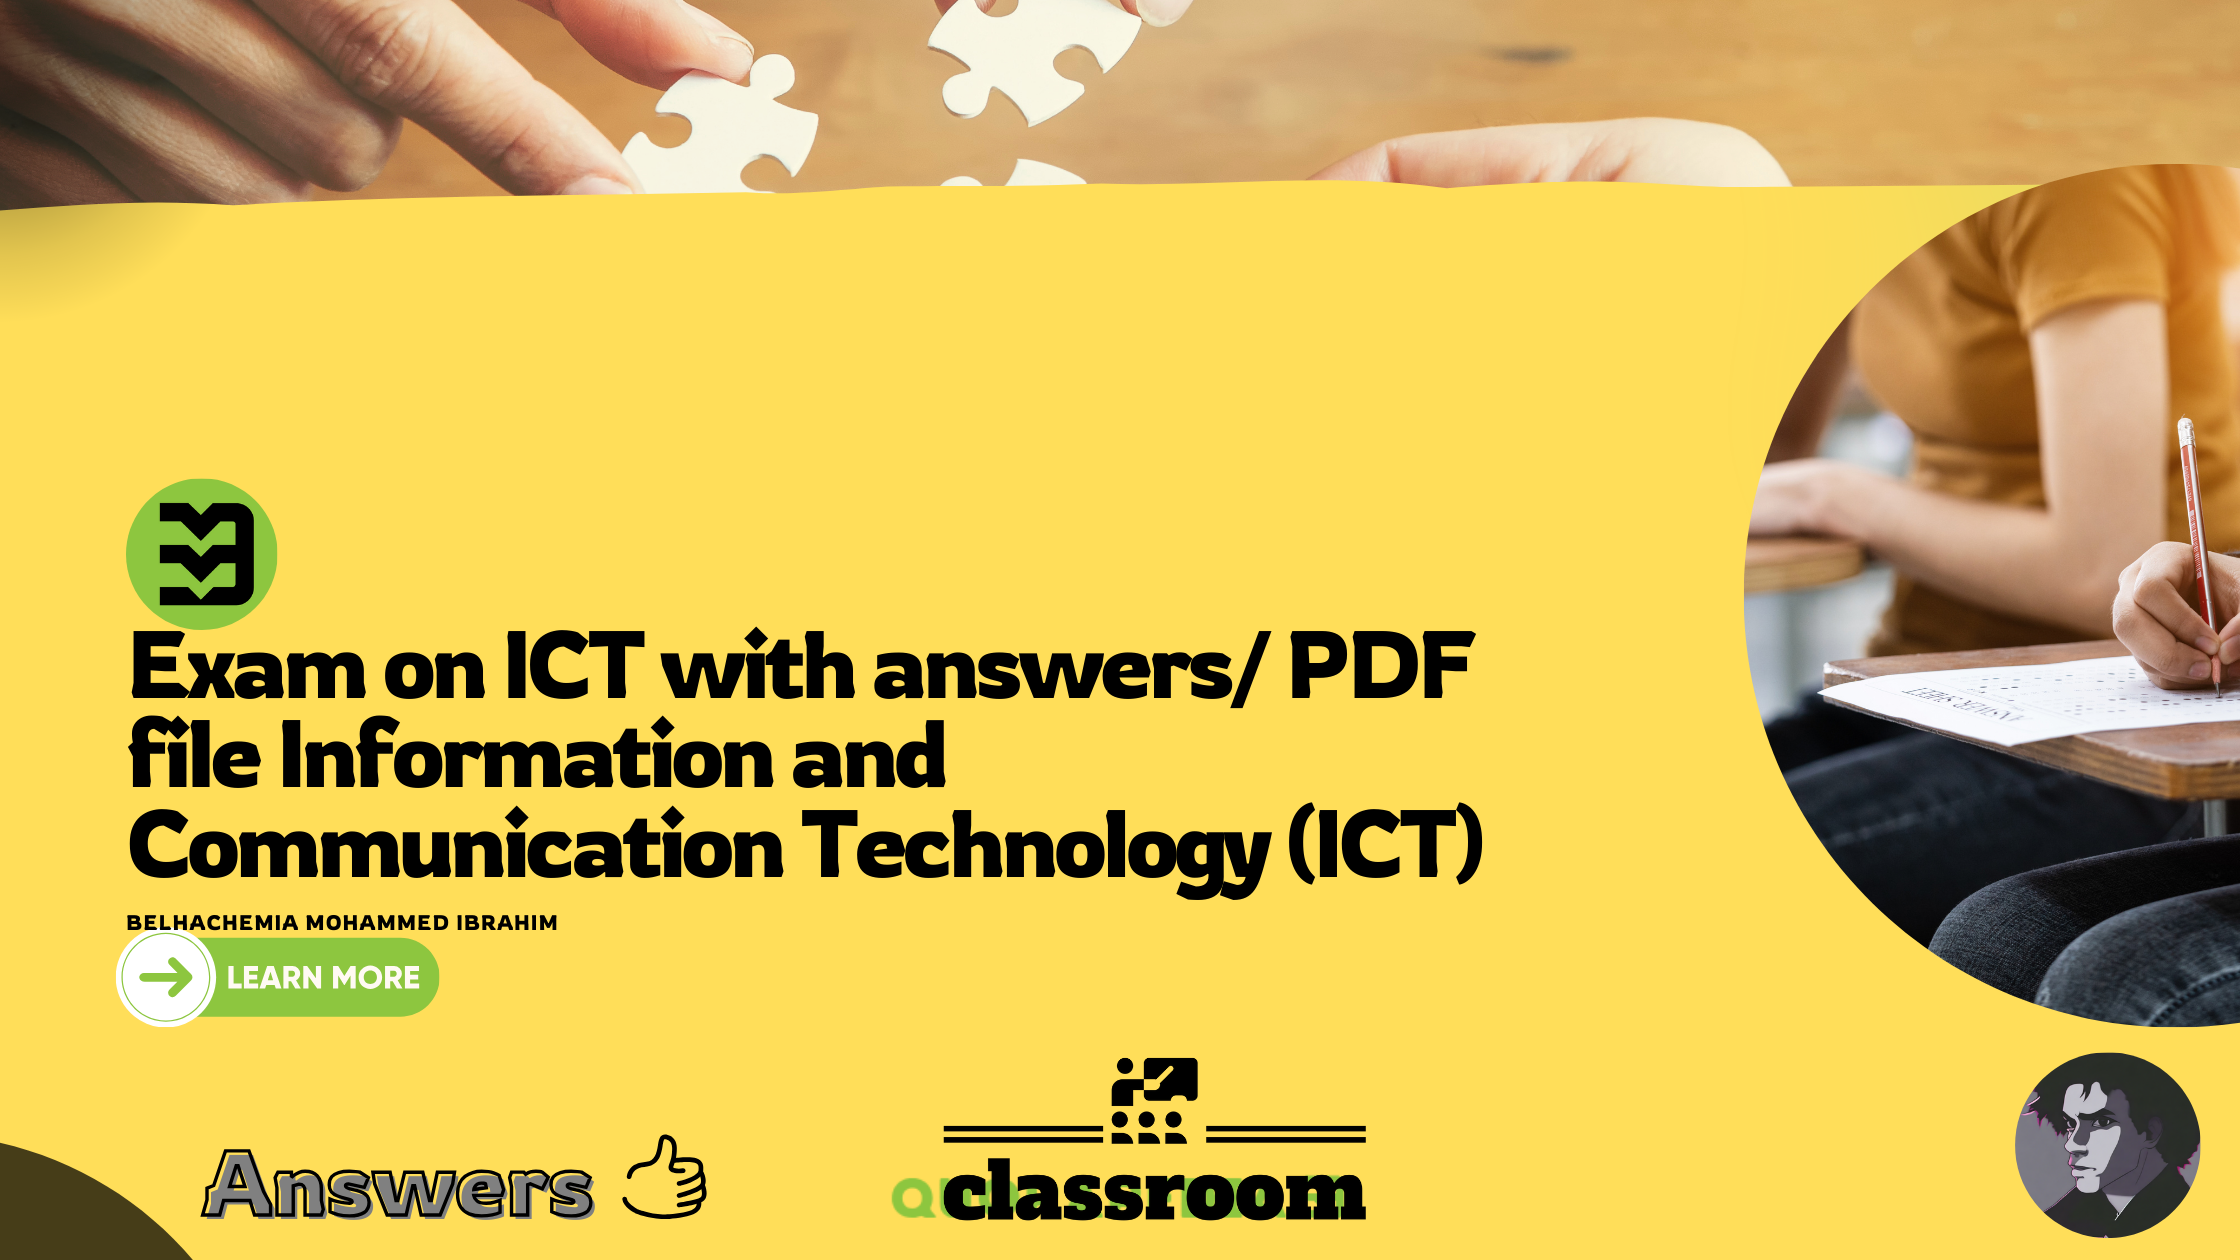 Exam on ICT with answers/ PDF file